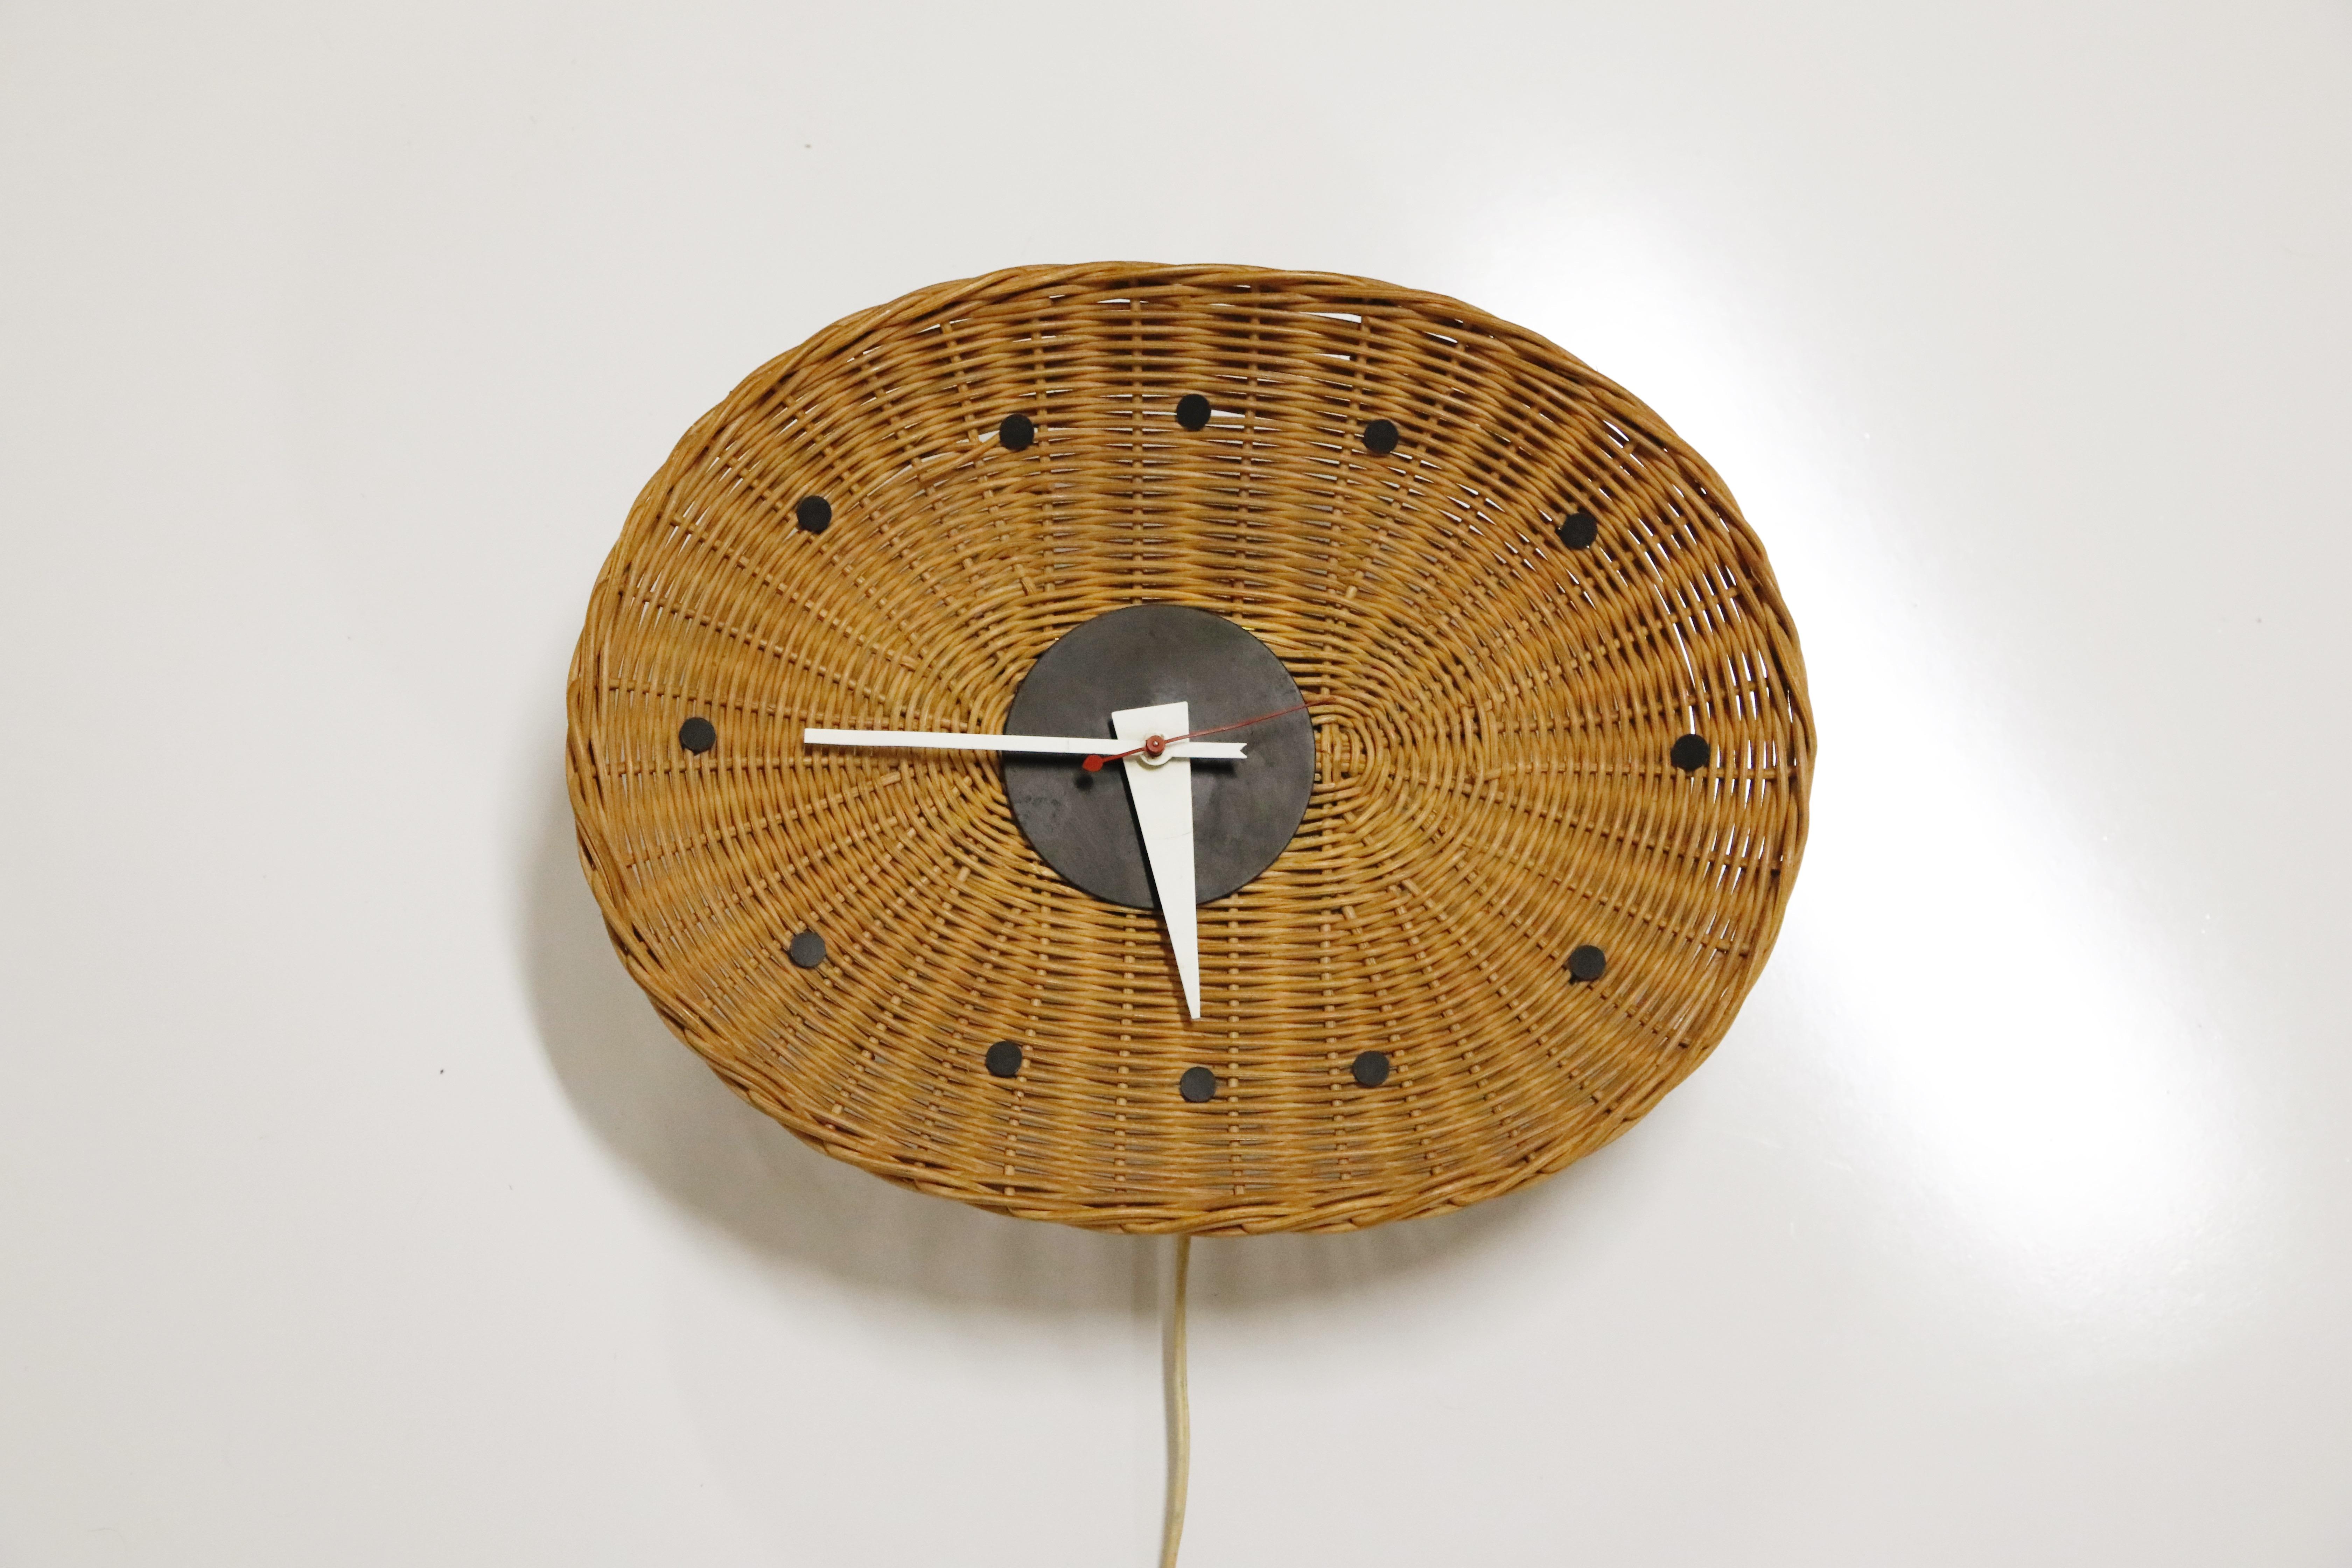 Out of the 150+ designs created by George Nelson for Howard Miller, this Oval 'Basket' wall clock is one of the more rare editions. Small black circles mark the number positions around the oval, woven wicker-basket clock face. From the center, the